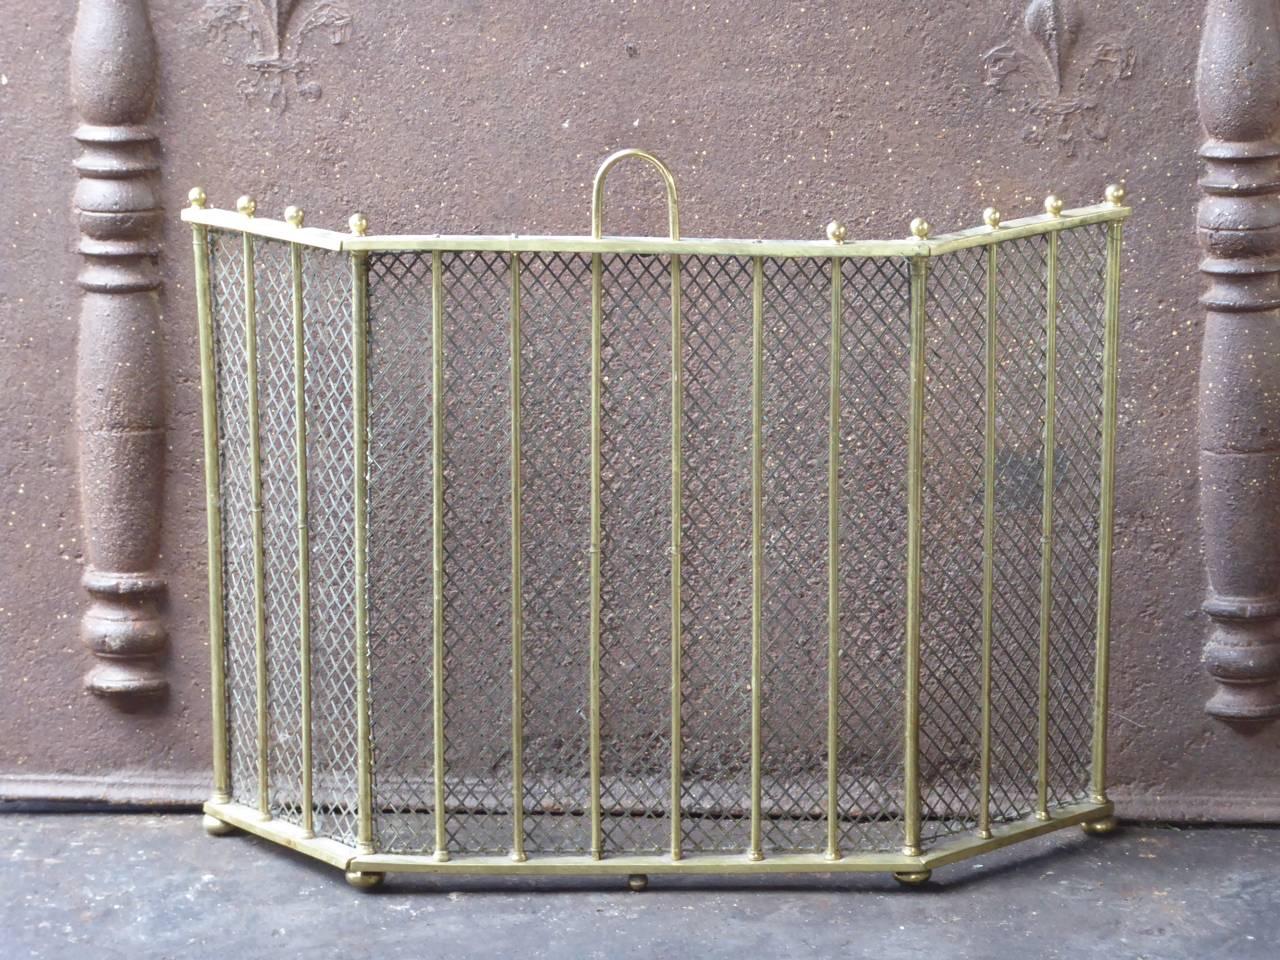 English Victorian style fireplace screen made of brass and iron mesh.

We have a unique and specialized collection of antique and used fireplace accessories consisting of more than 1000 listings at 1stdibs. Amongst others, we always have 500+